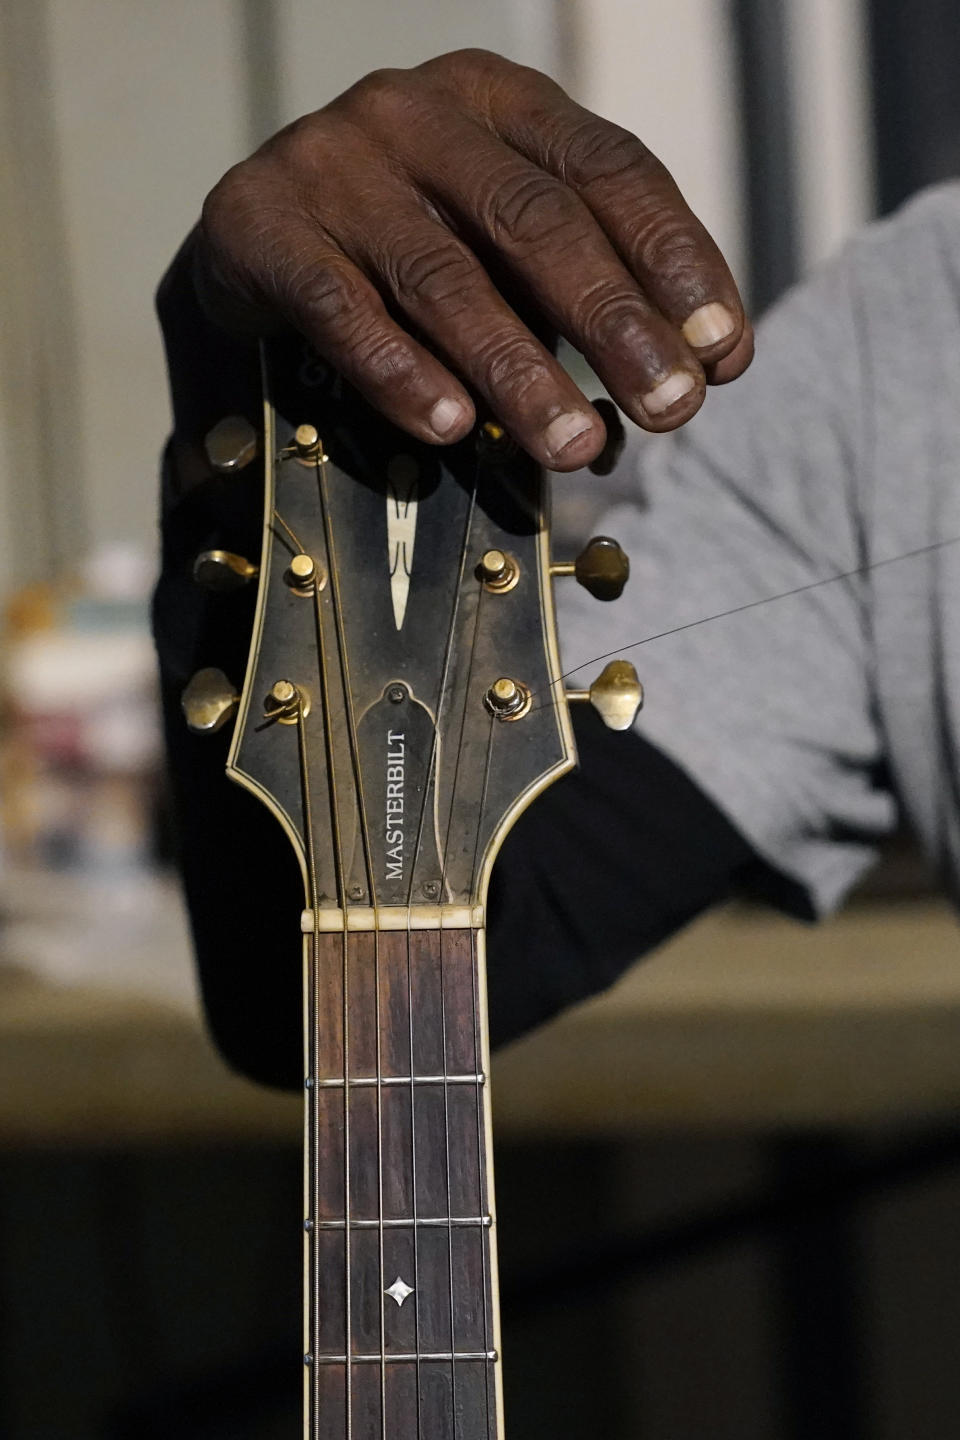 Resting his hand against the head of his acoustic guitar, blues performer Jimmy "Duck" Holmes' fingertips show the wear after years of performing without a pic at the Blue Front Cafe in Bentonia, Miss., Jan. 21, 2021. Holmes' ninth album, "Cypress Grove," has earned a Grammy nomination for the Best Traditional Blues Album. (AP Photo/Rogelio V. Solis)